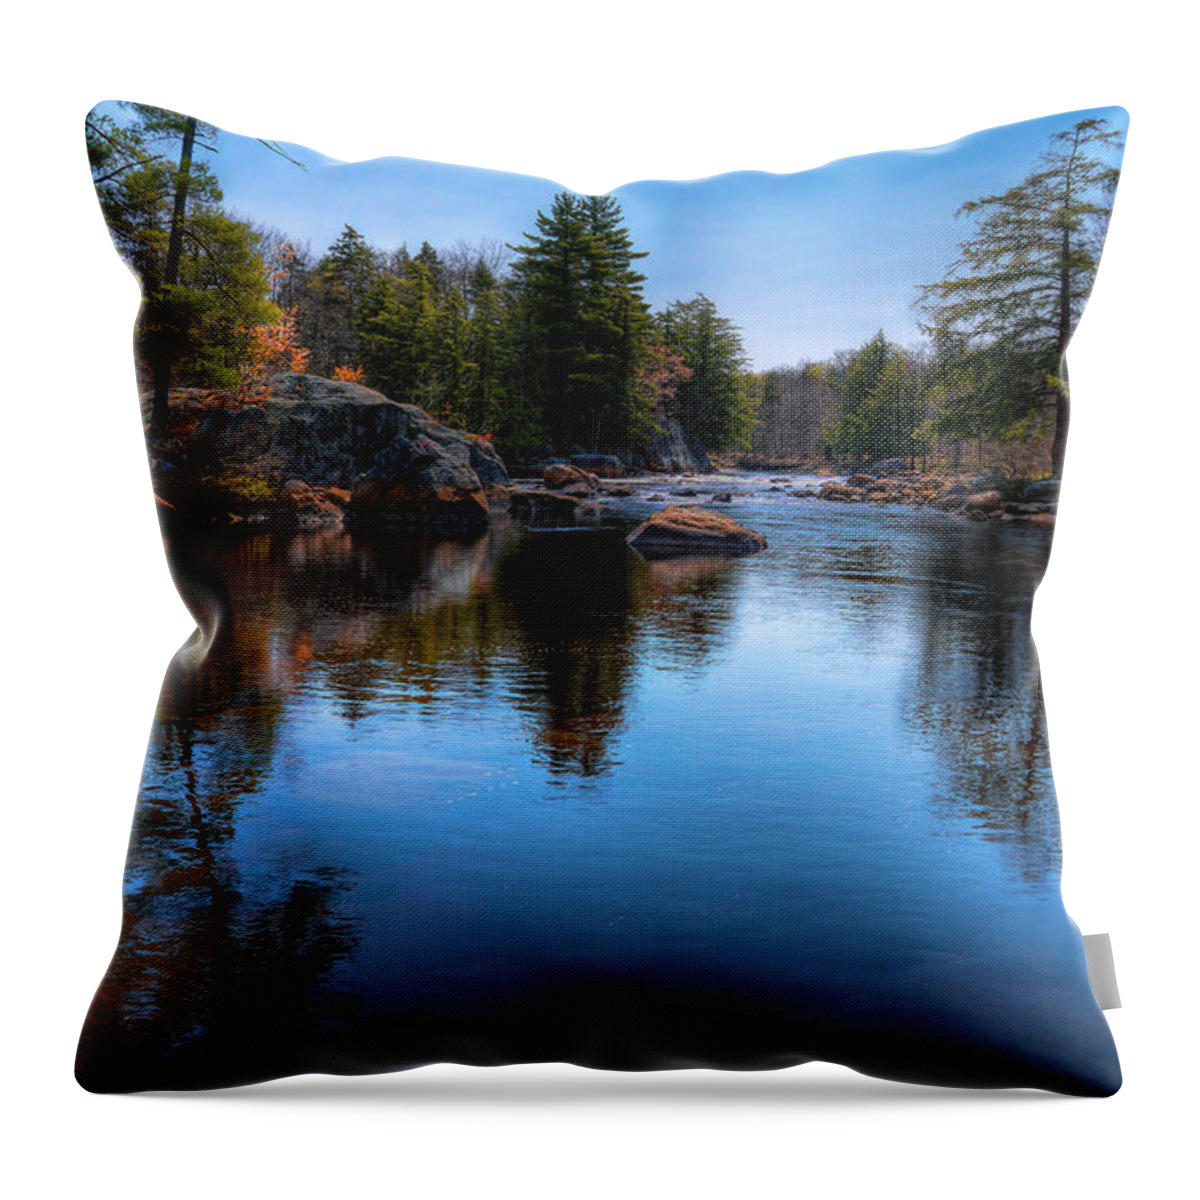 Spring Day On The River Throw Pillow featuring the photograph Spring Day on the River by David Patterson